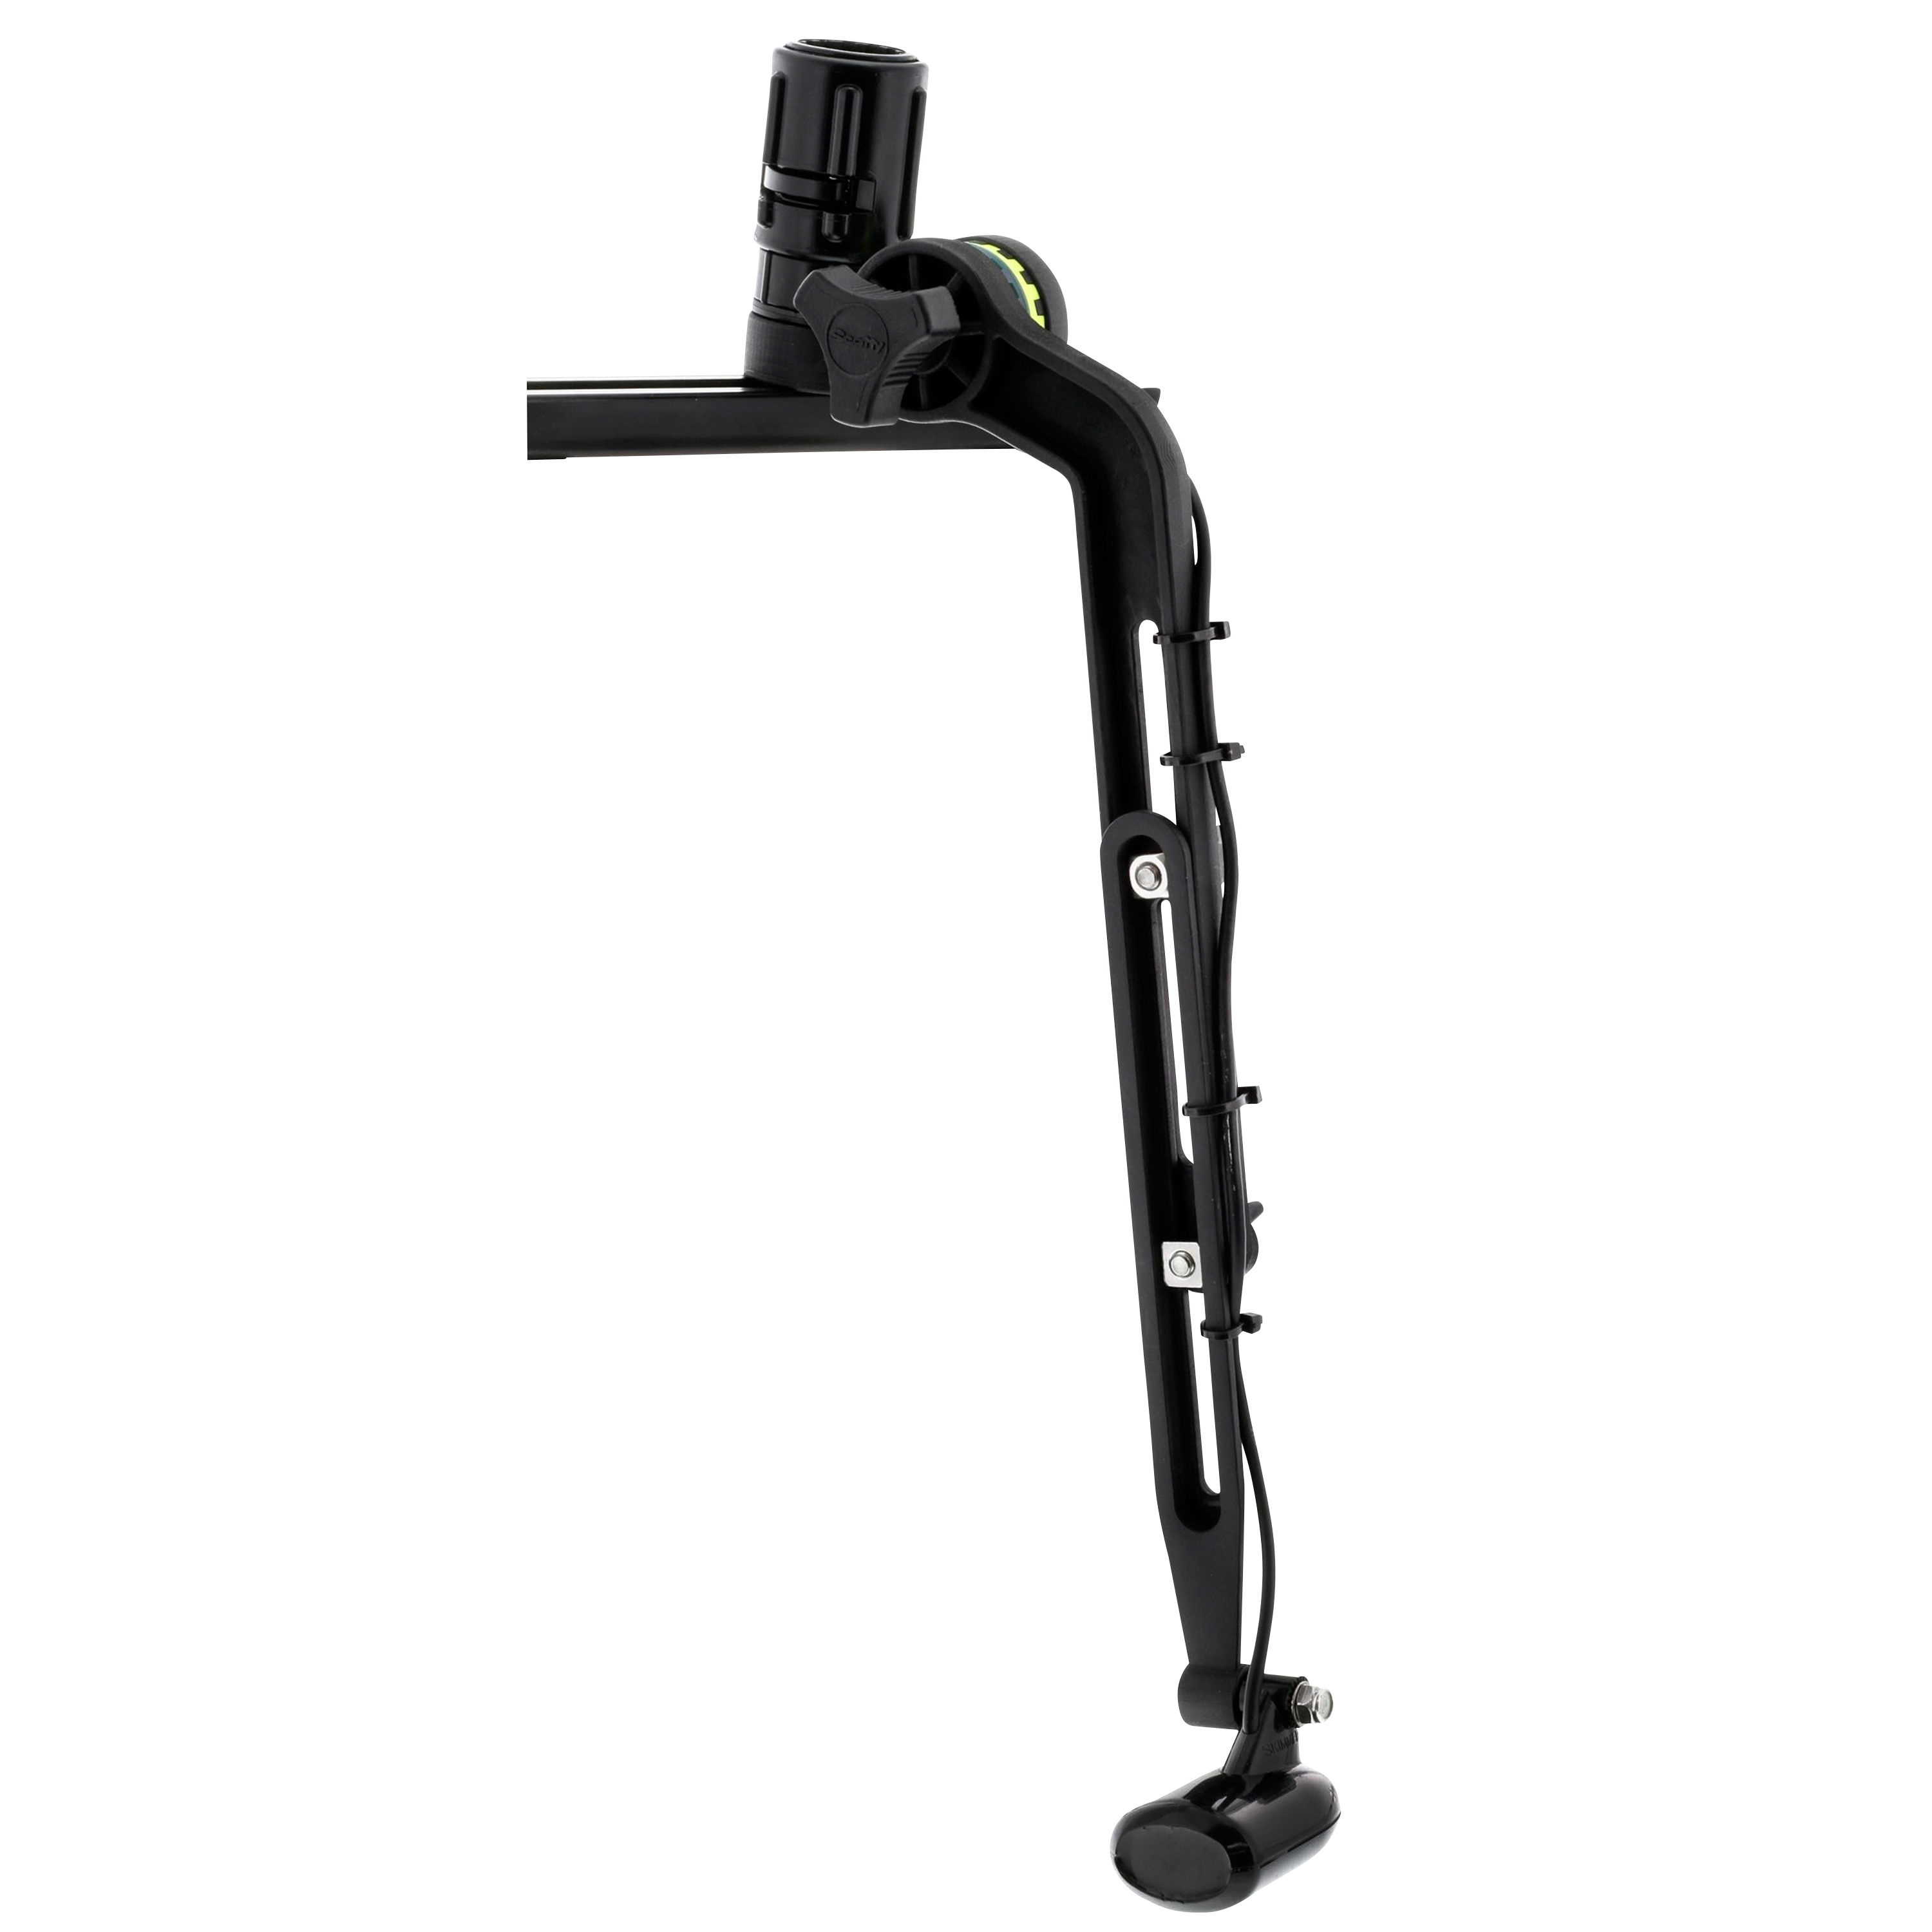 Scotty Kayak/SUP Transducer Mounting Arm with Gear-Head, Black